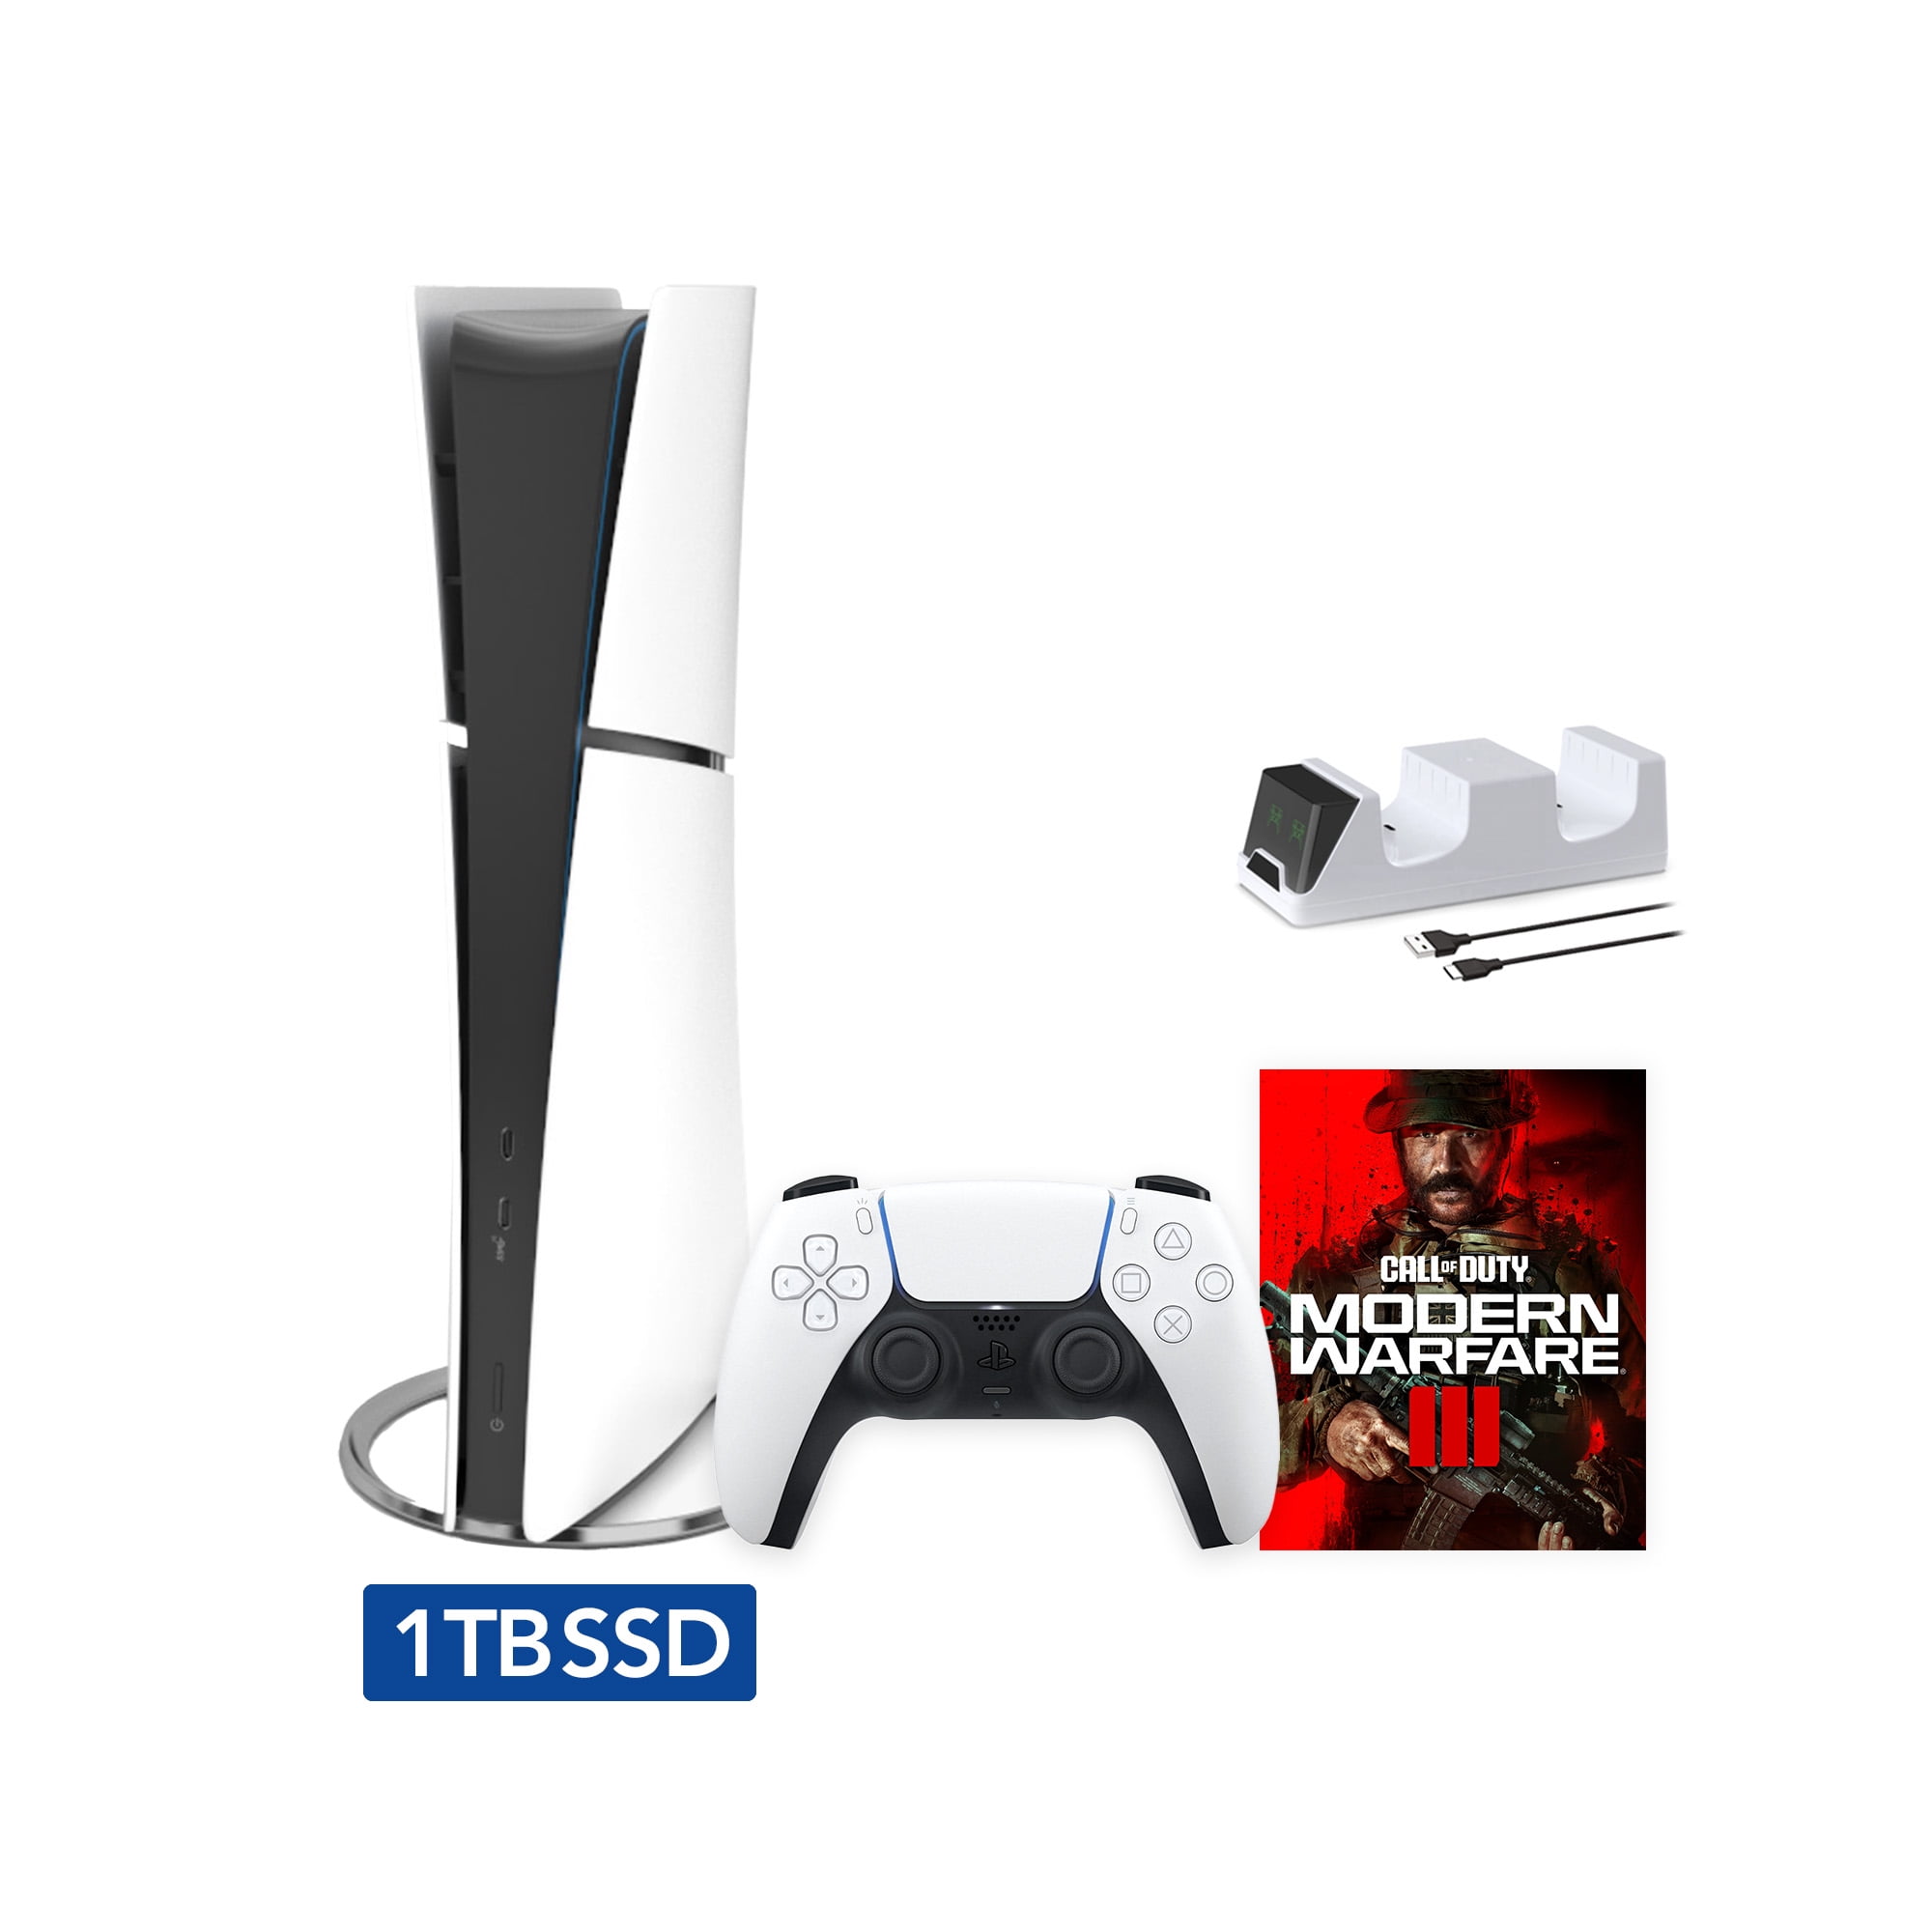 2023 New PlayStation 5 Slim Digital Edition Call of Duty Modern Warfare III  Bundle and Mytrix Controller Charger - White, Slim PS5 1TB PCIe SSD Gaming  